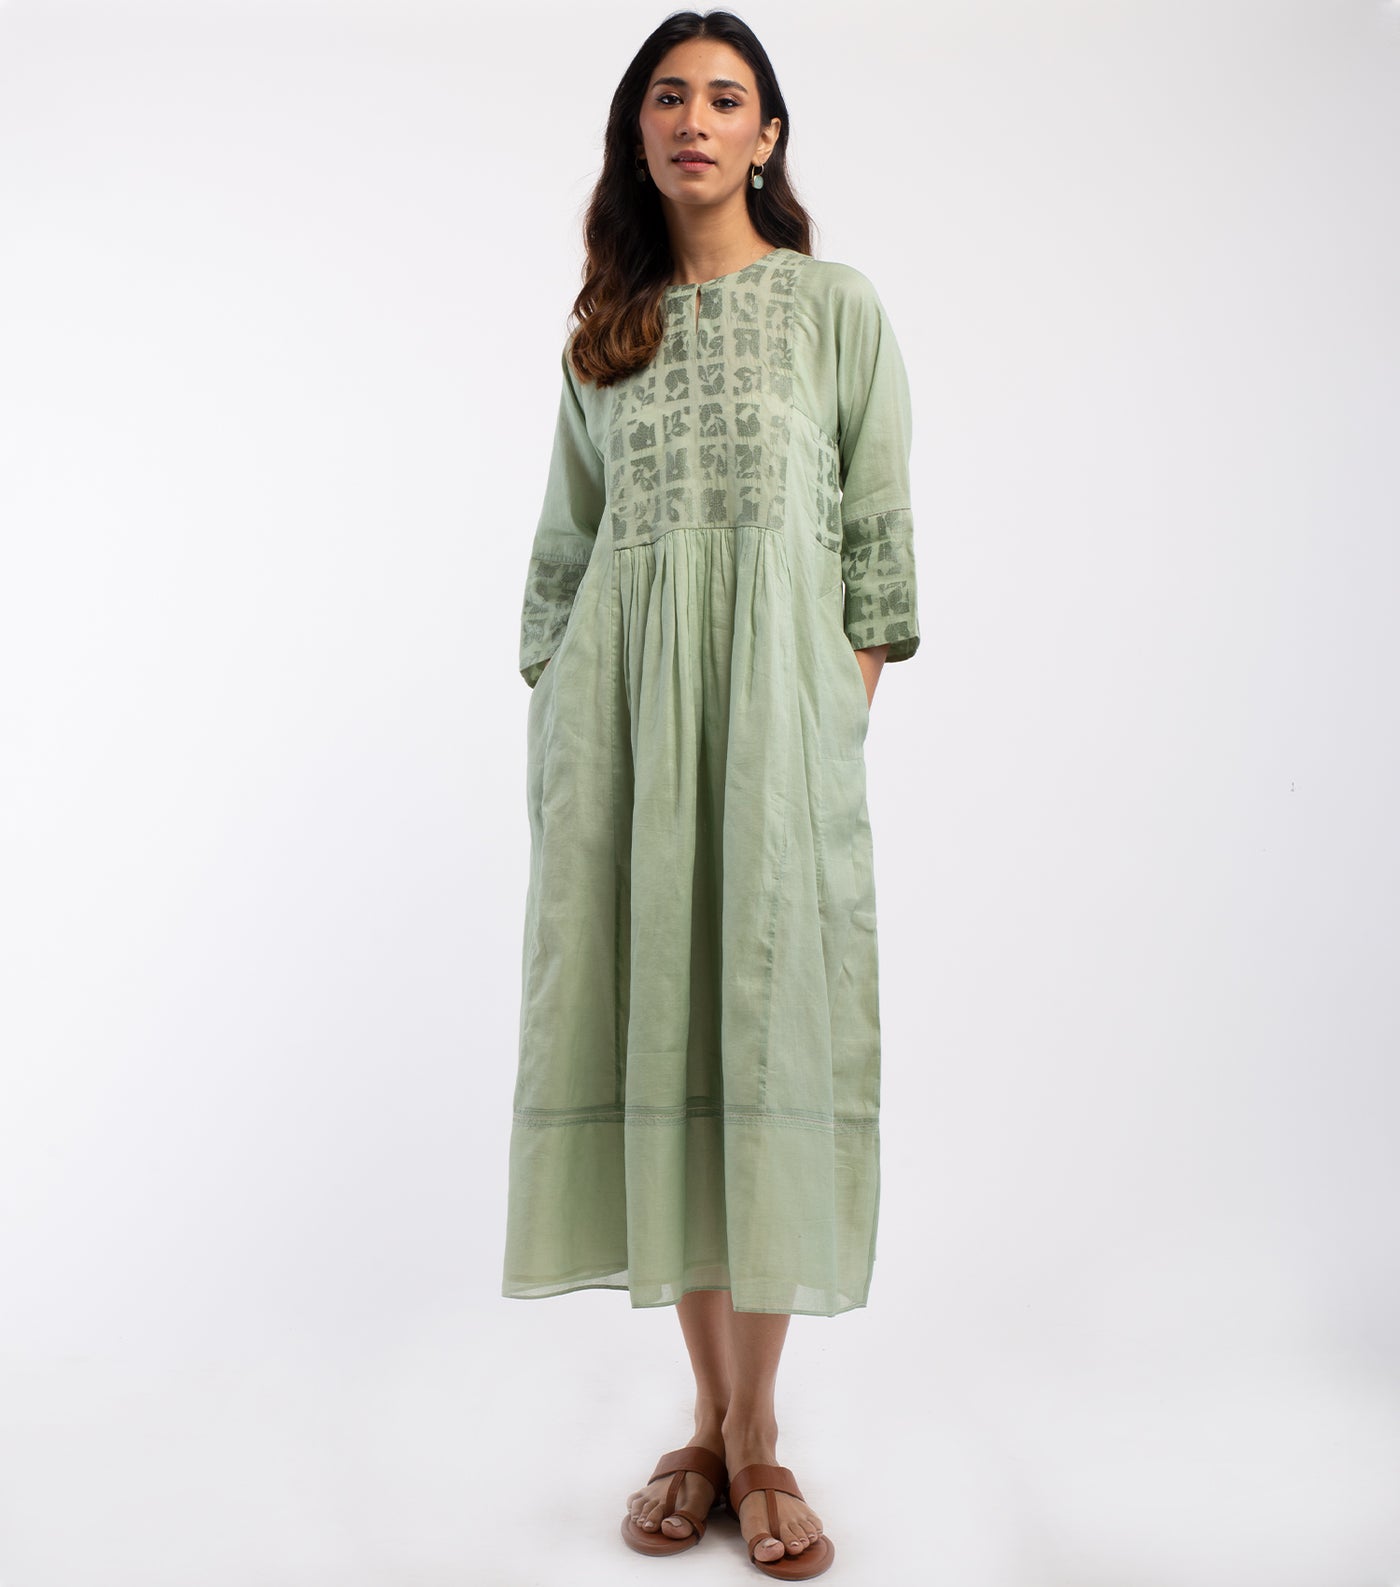 Green Embroidered Cotton Dress